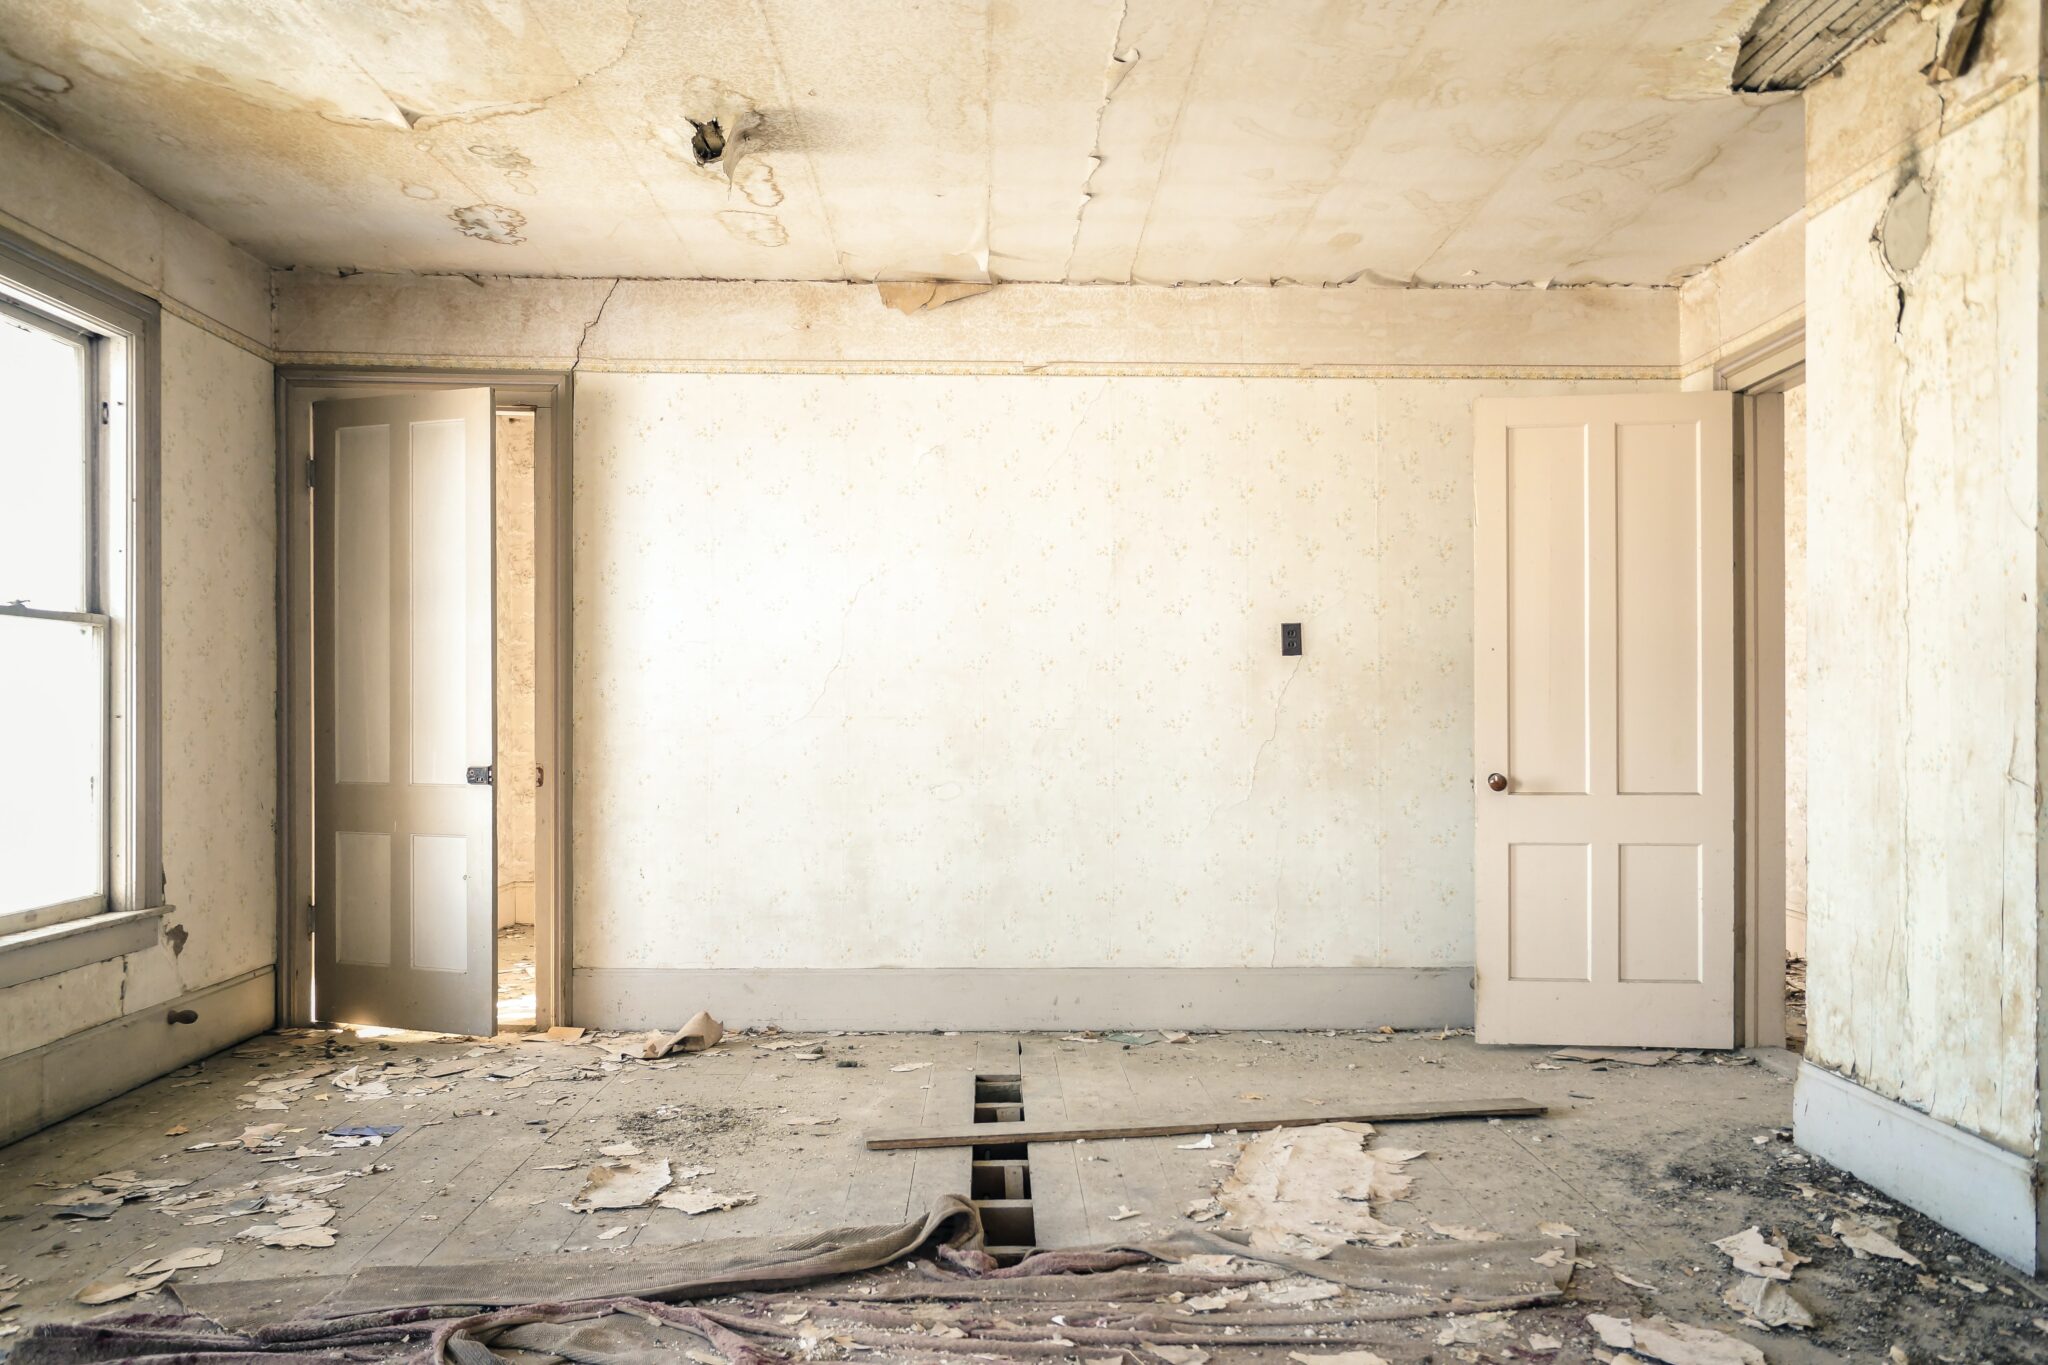 A room that is falling apart with old white décor.